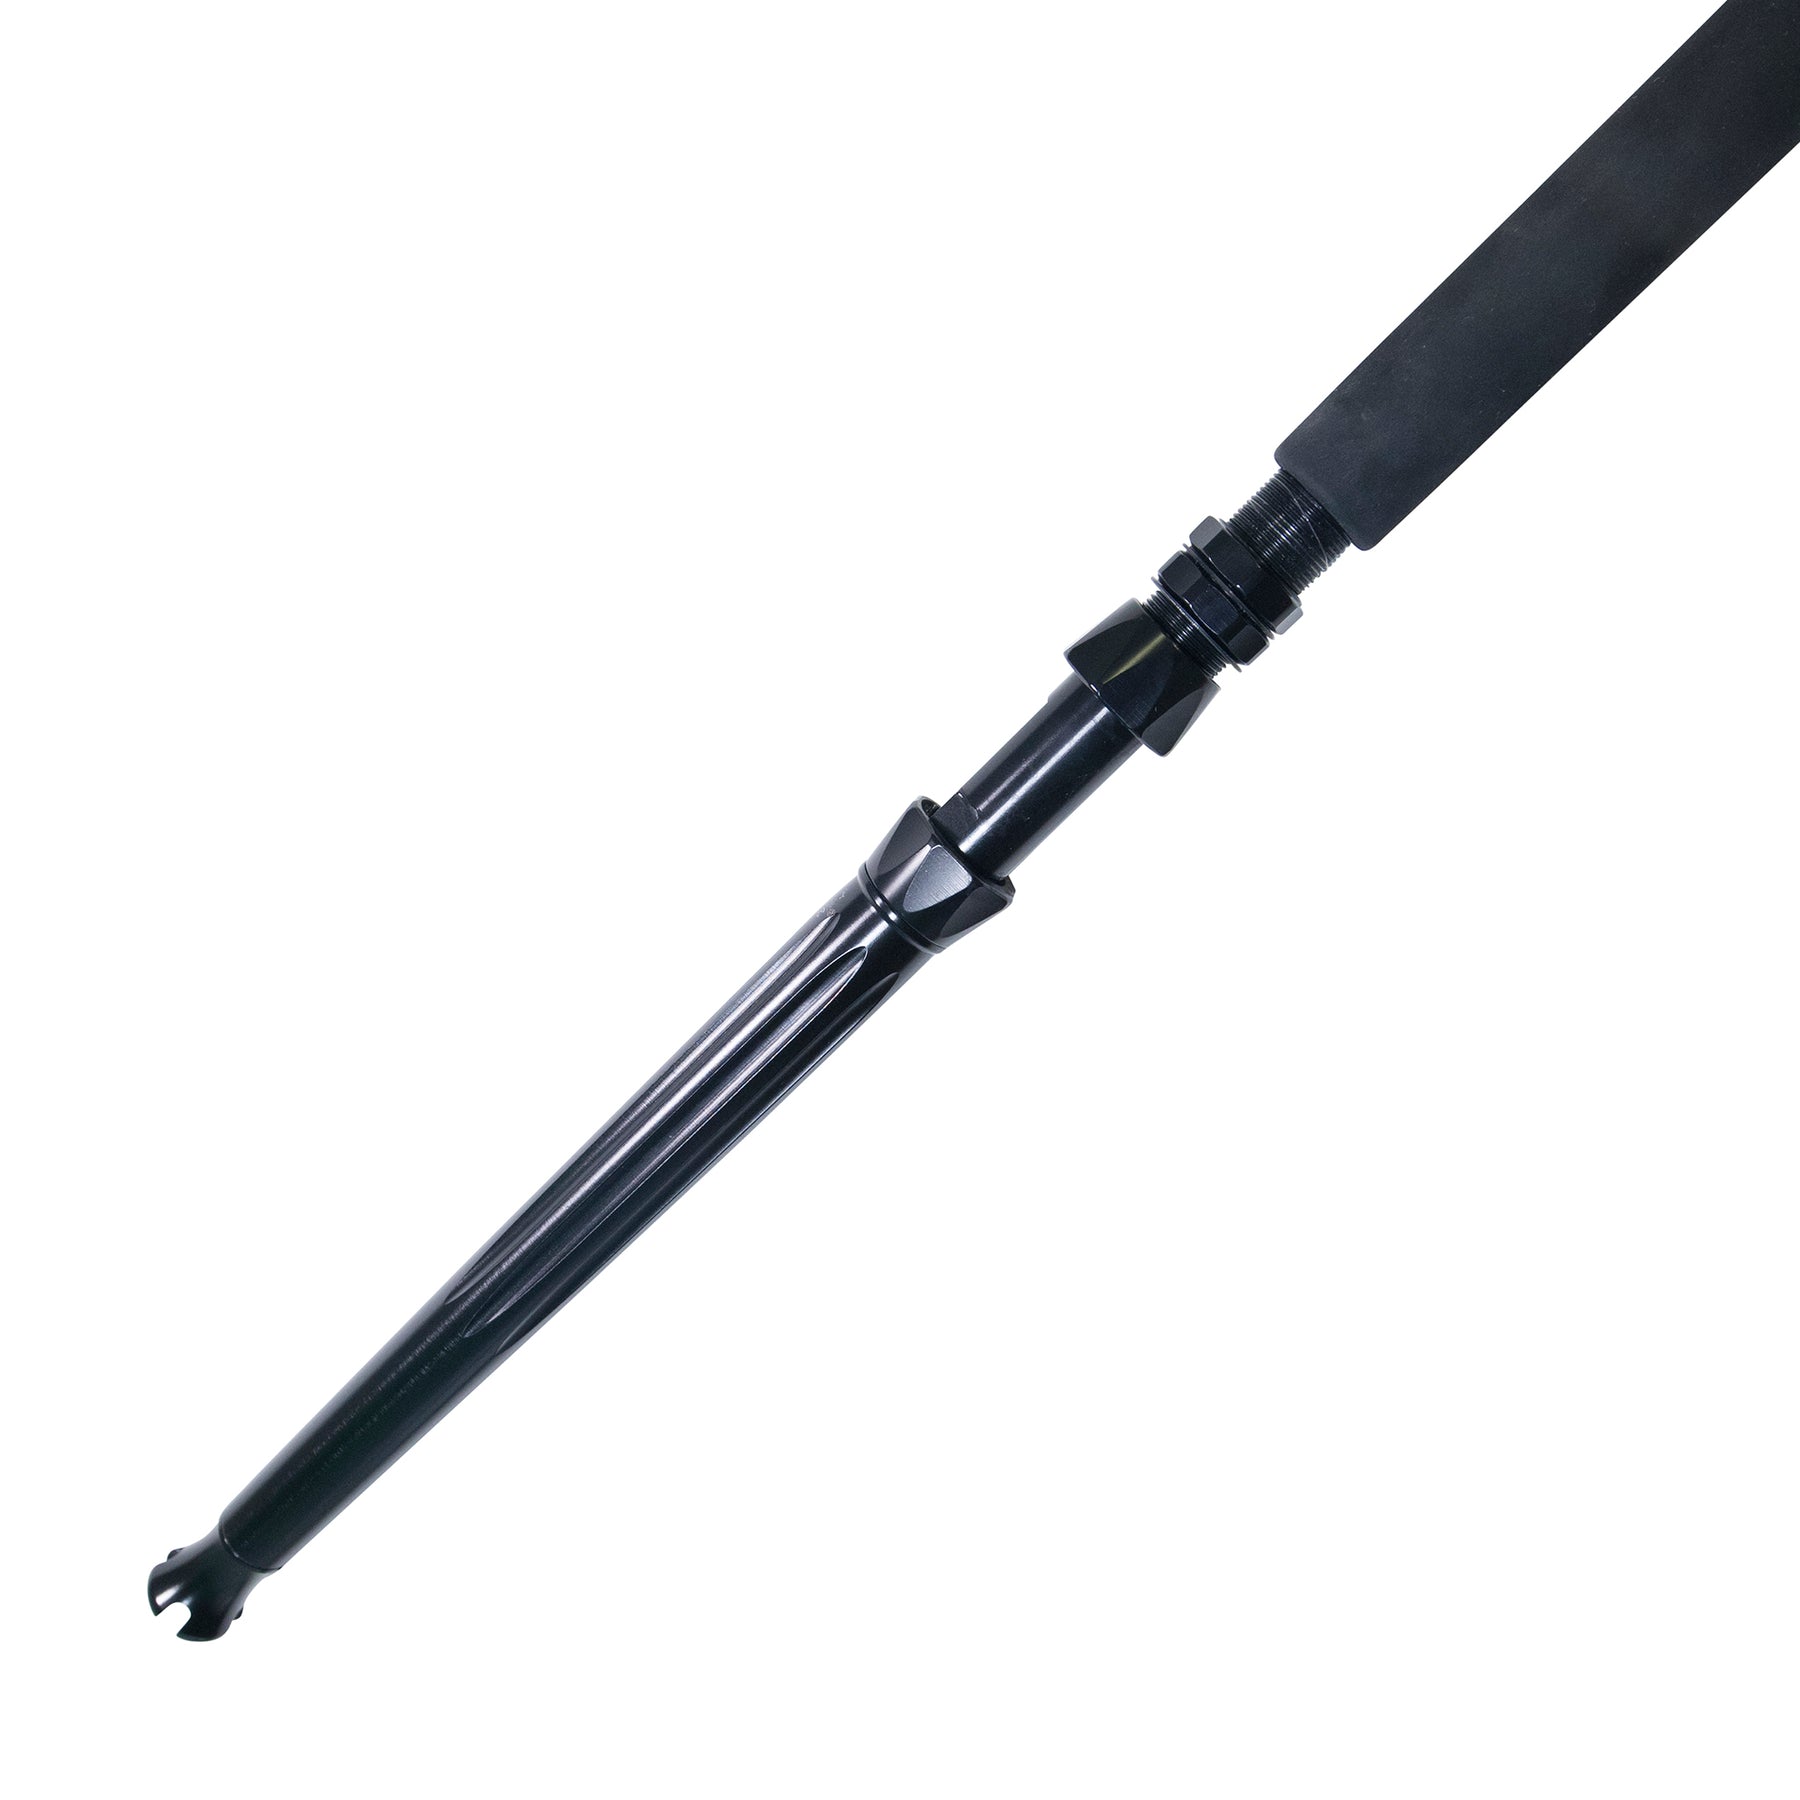 BlacktipH Shark Fishing Rod with Winthrop Terminator Butt and Carbon Fiber  Wrap